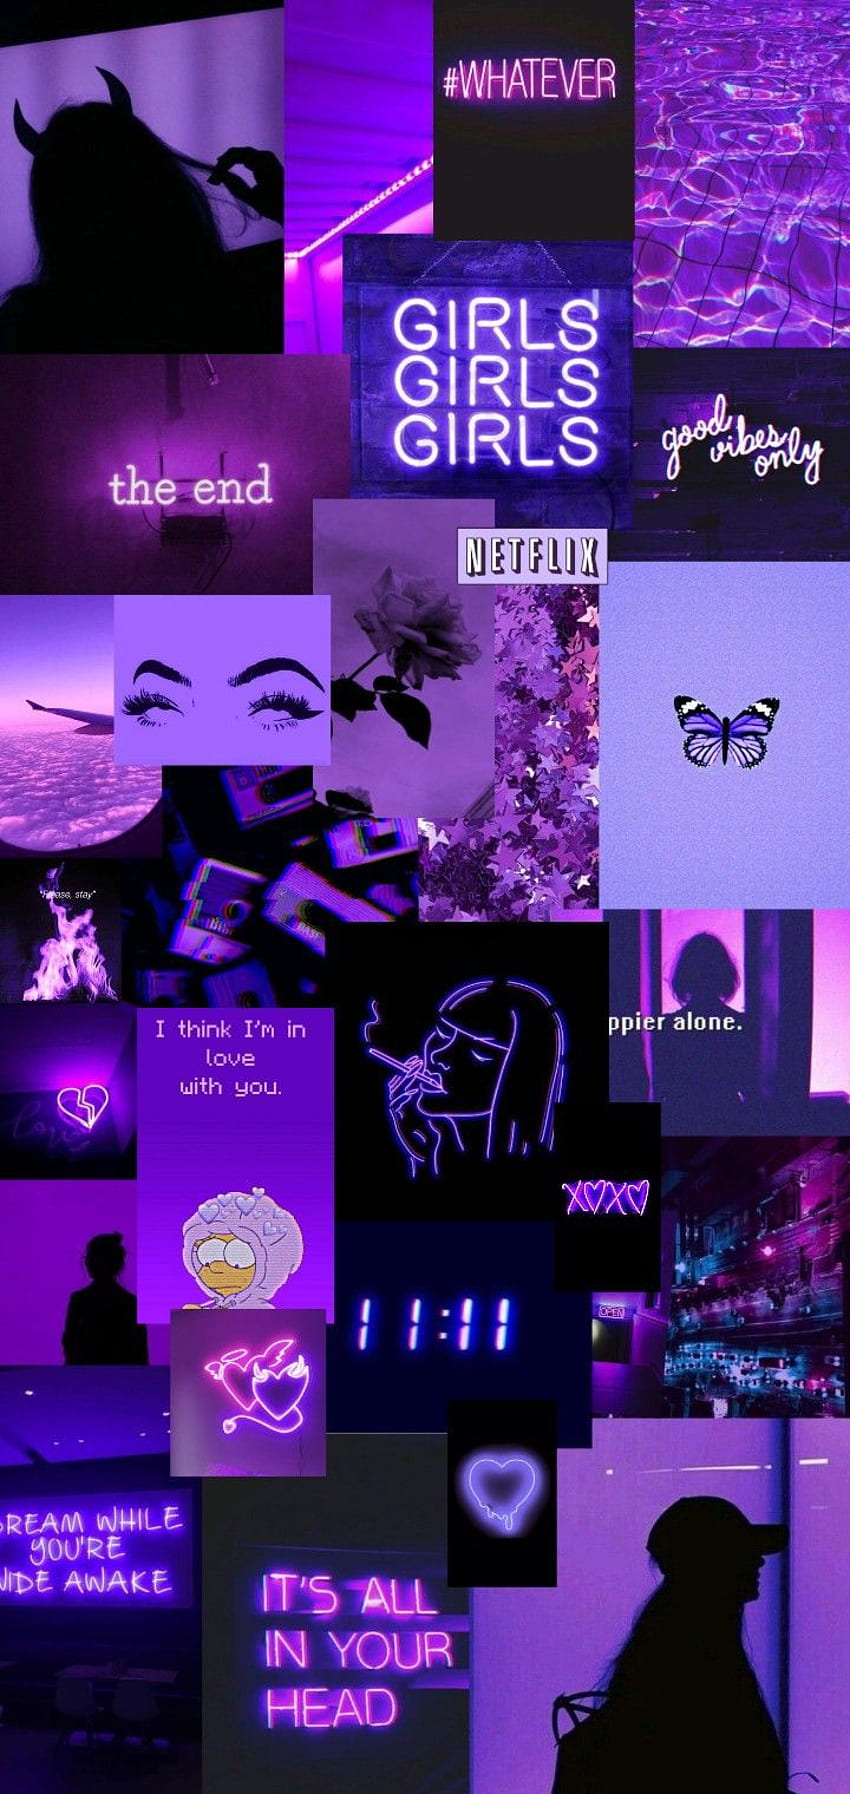 A collage of images with purple and pink colors - Purple, dark purple, neon purple